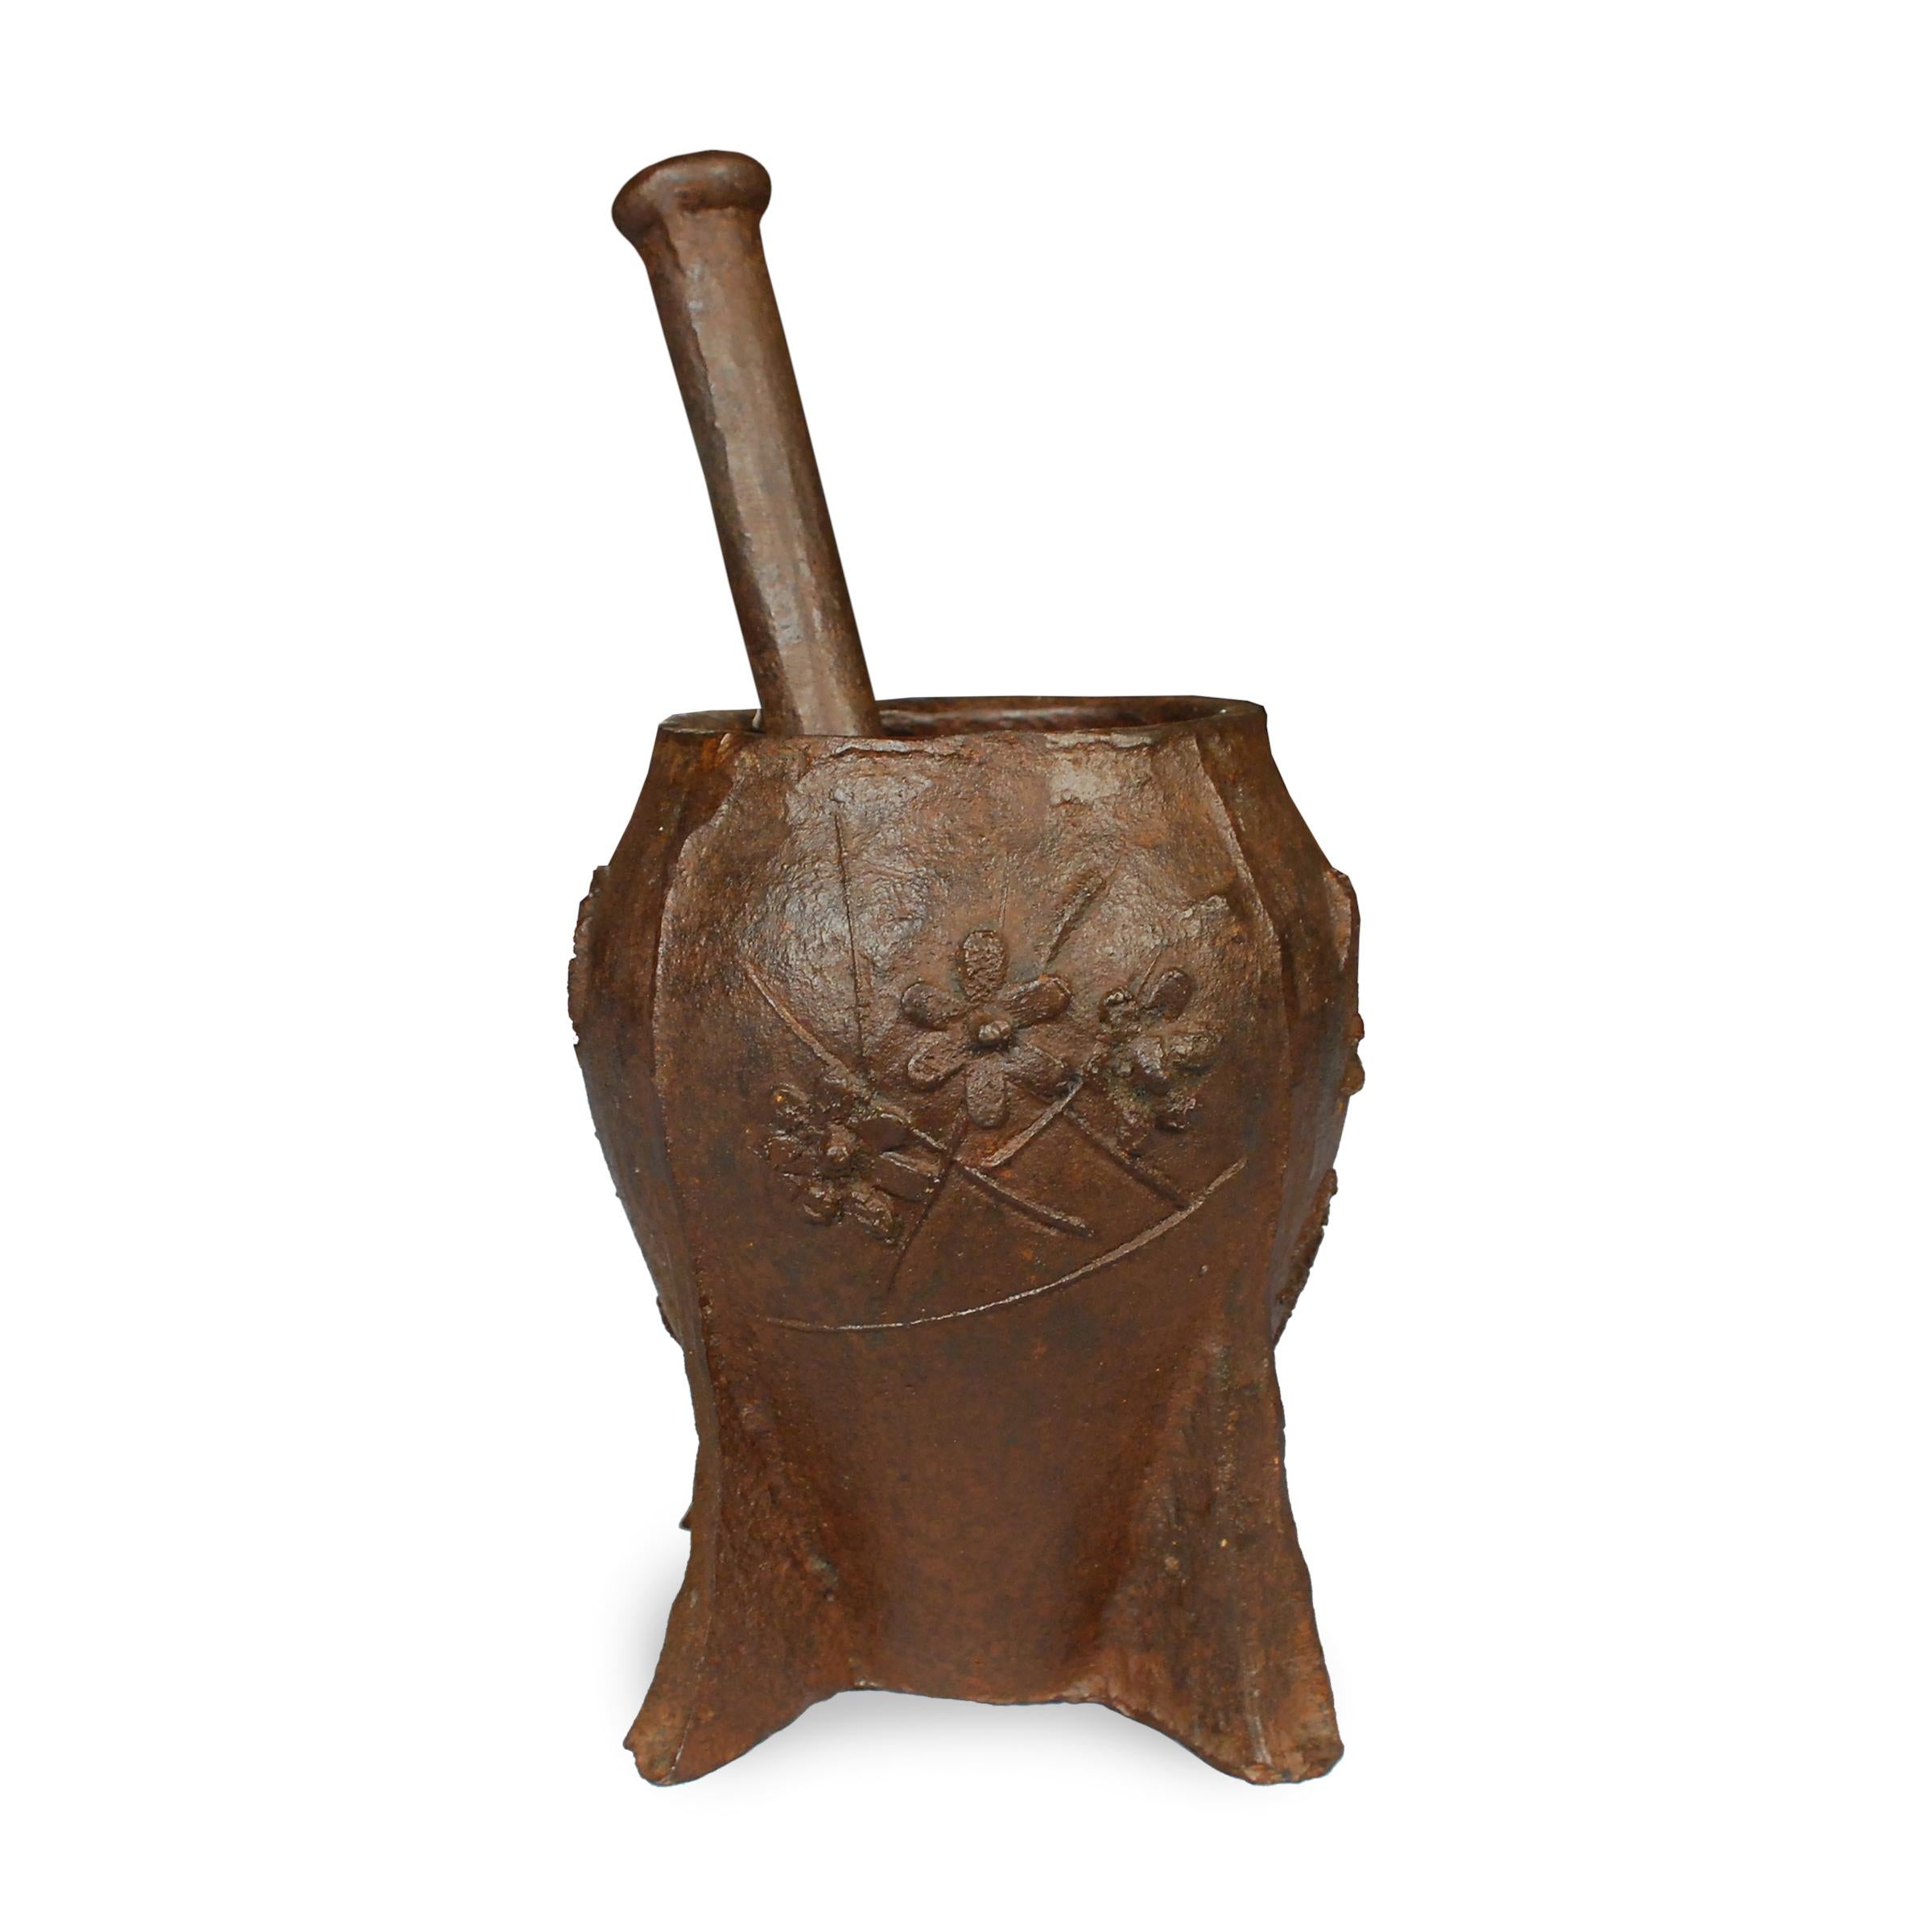 This vintage cast iron mortar from China's Shanxi province is patterned in low relief with a simple floral design. Originally used in a traditional apothecary to create herbal medicines, we love this piece as an unexpected vase or cachepot.